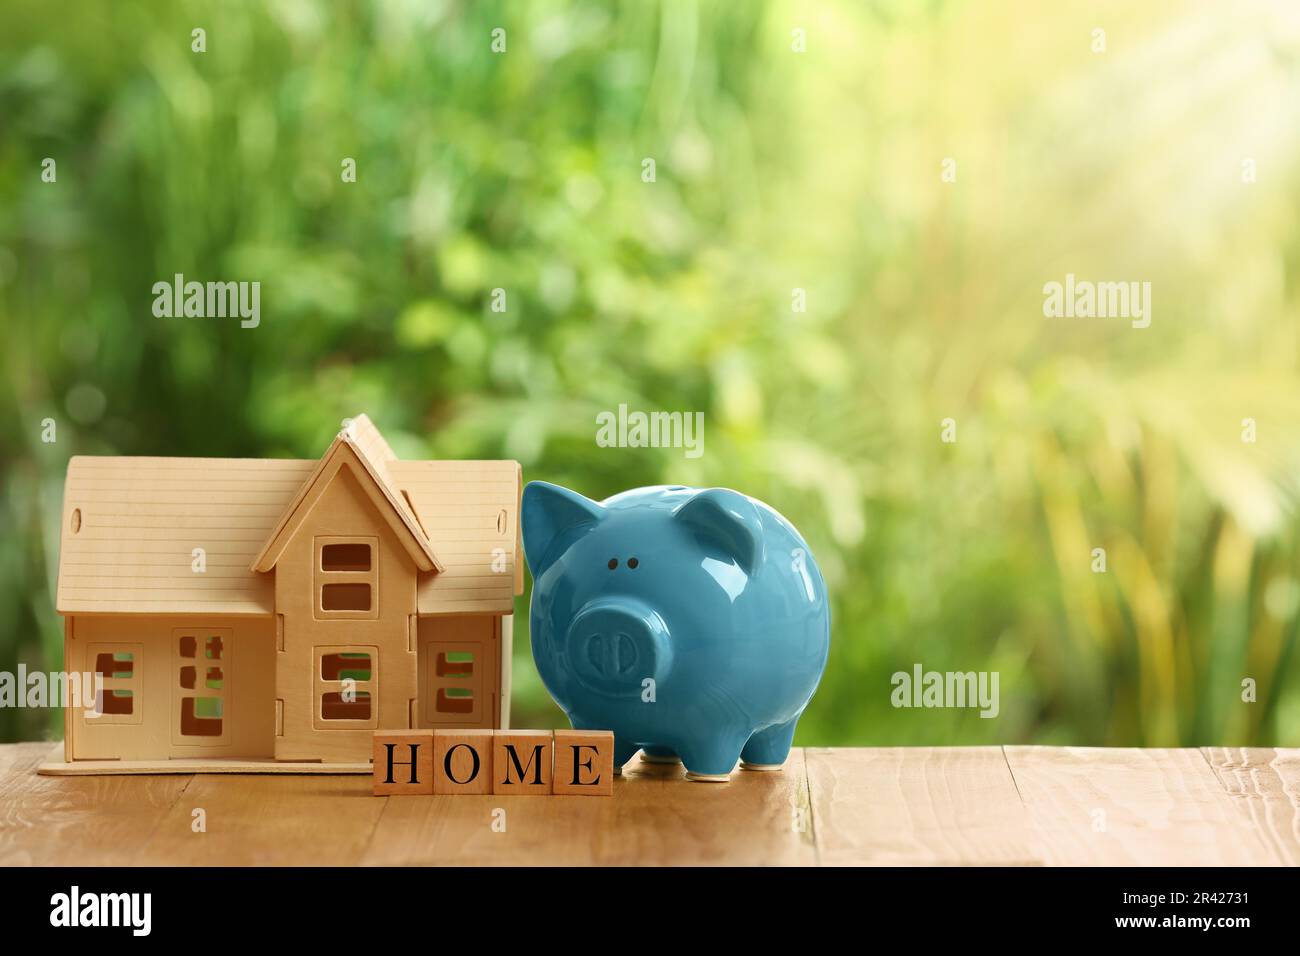 Piggy bank, house model and word Home made of cubes on wooden table outdoors. Space for text Stock Photo